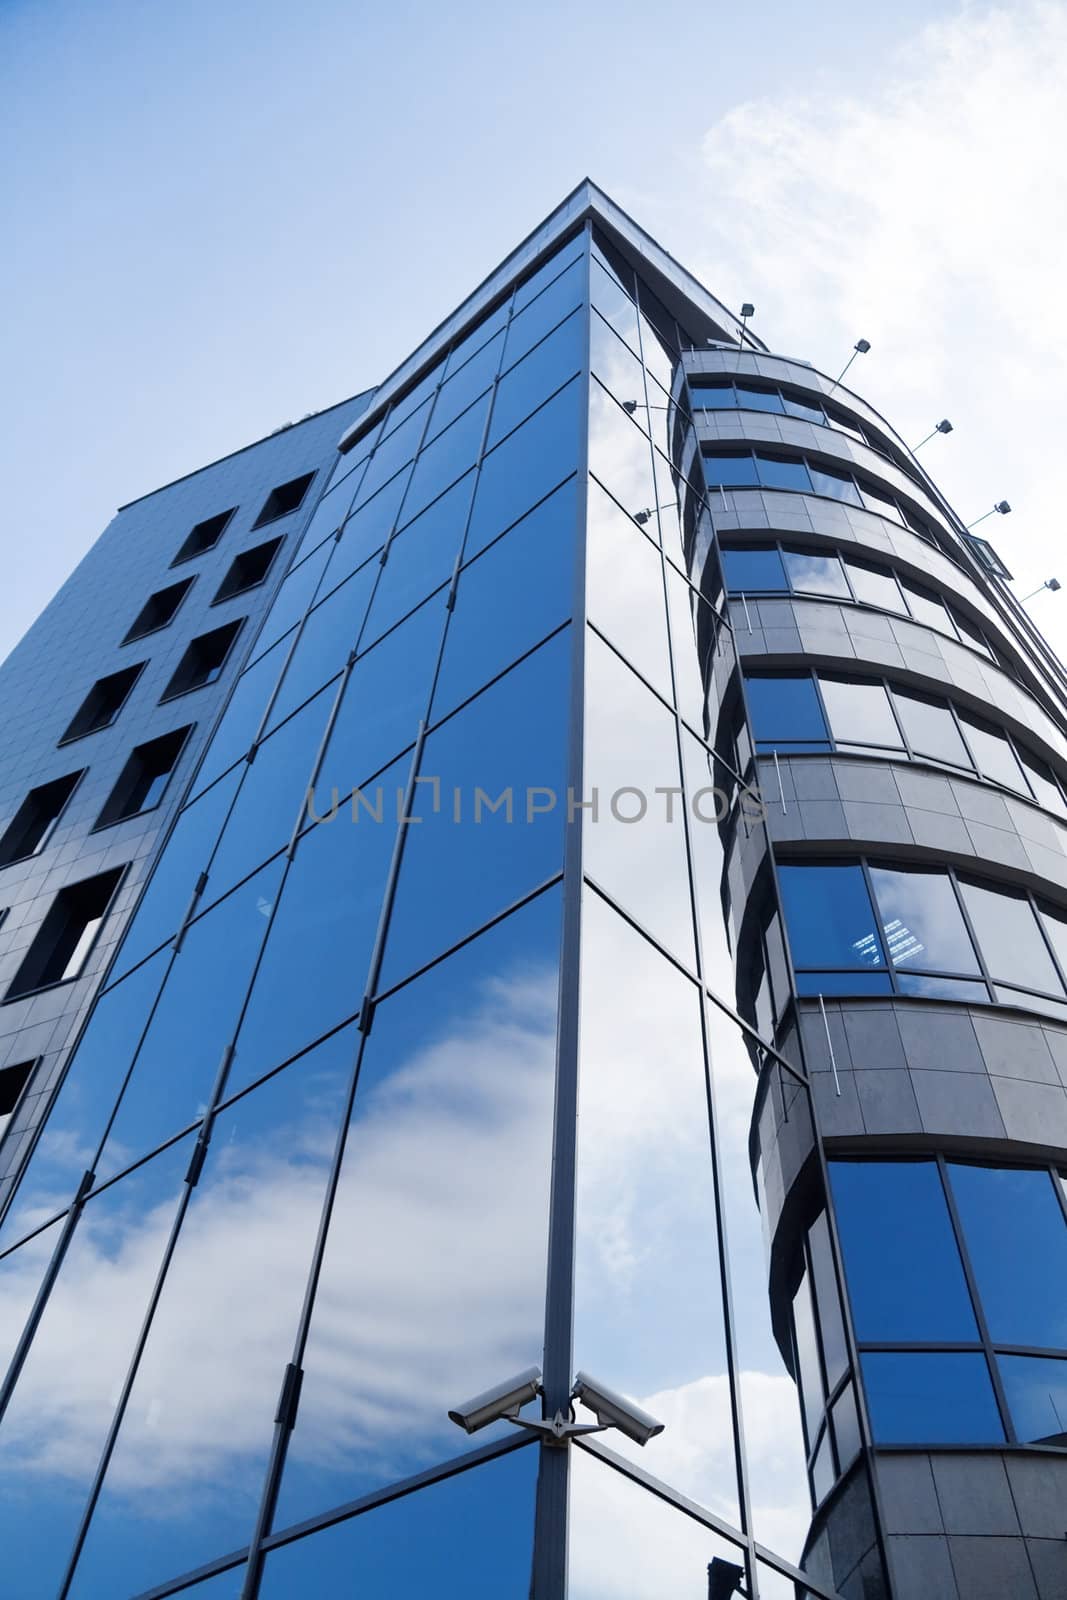 skyscraper window with bright blue sky reflected